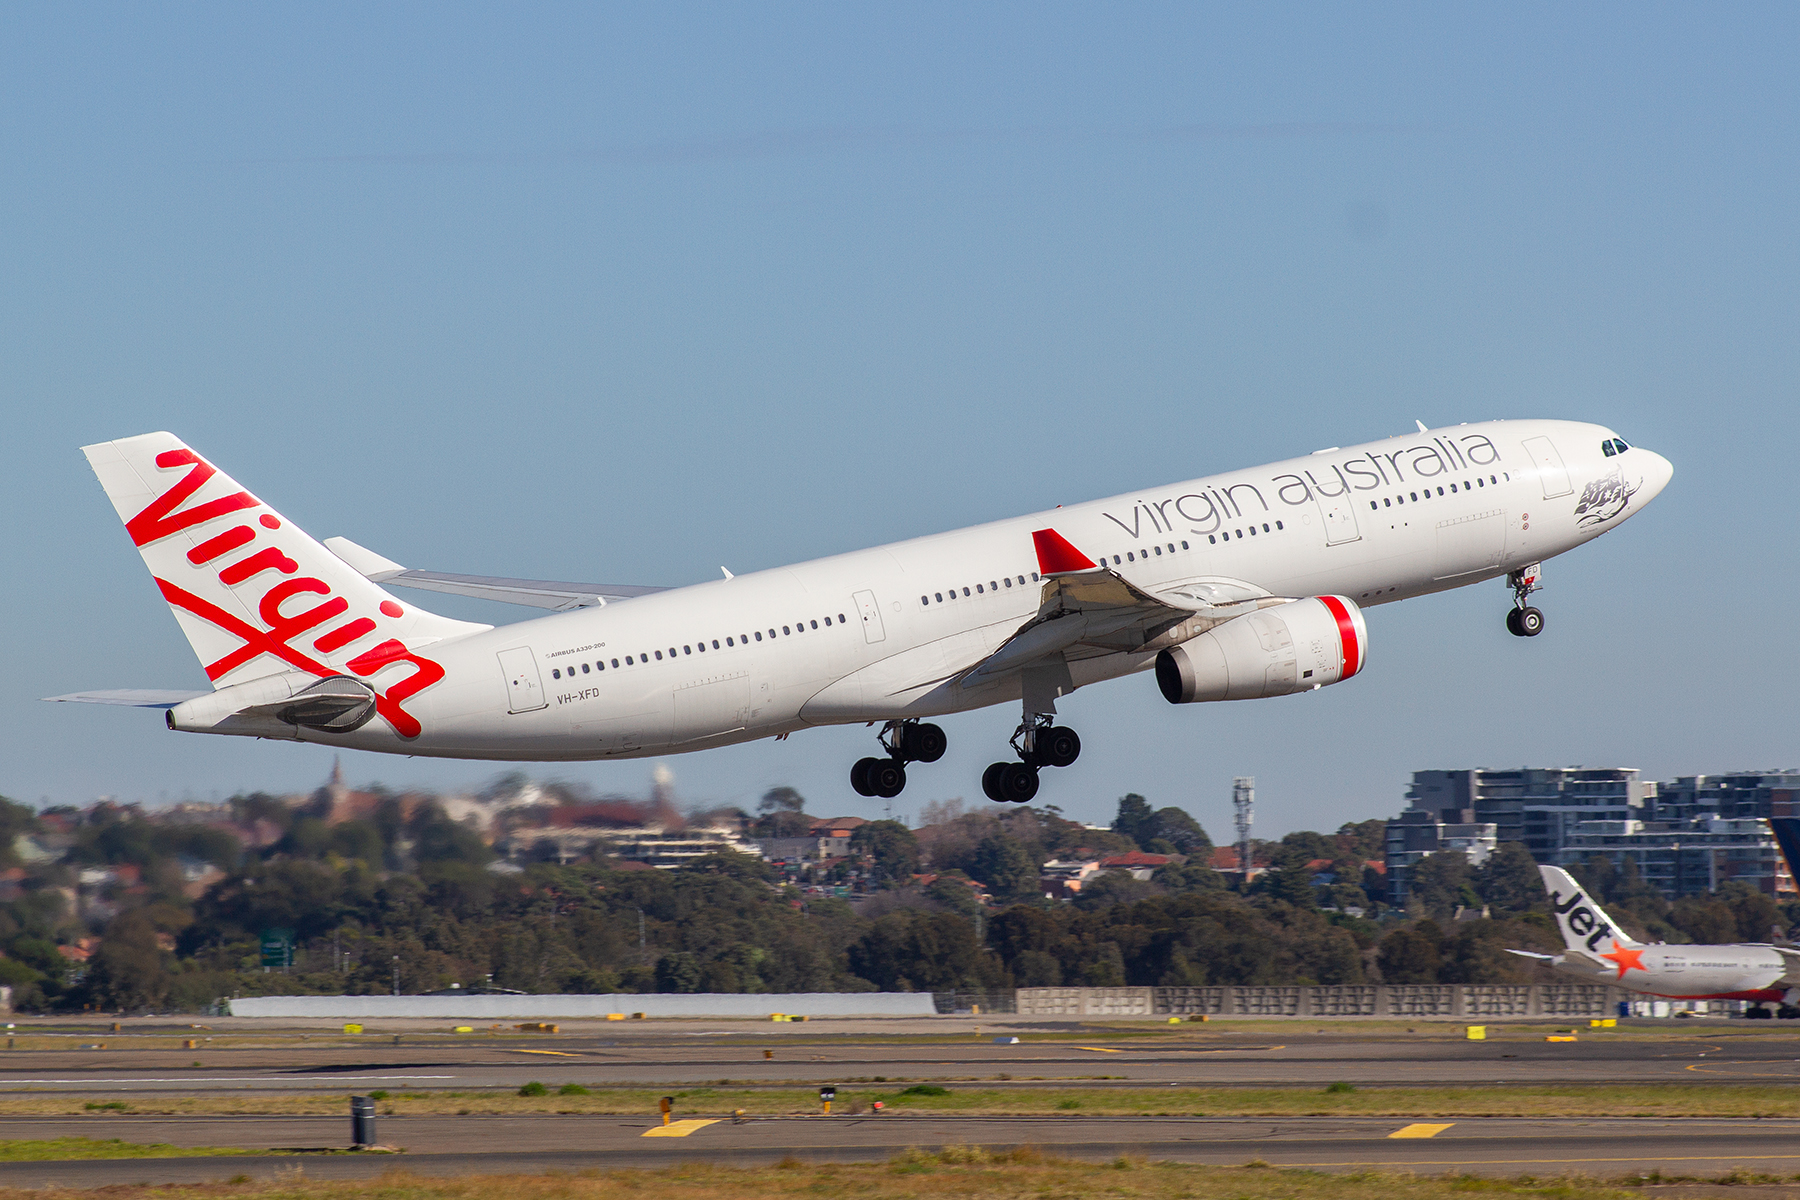 Virgin Australia Airlines Airbus A330-200 VH-XFD at Kingsford Smith